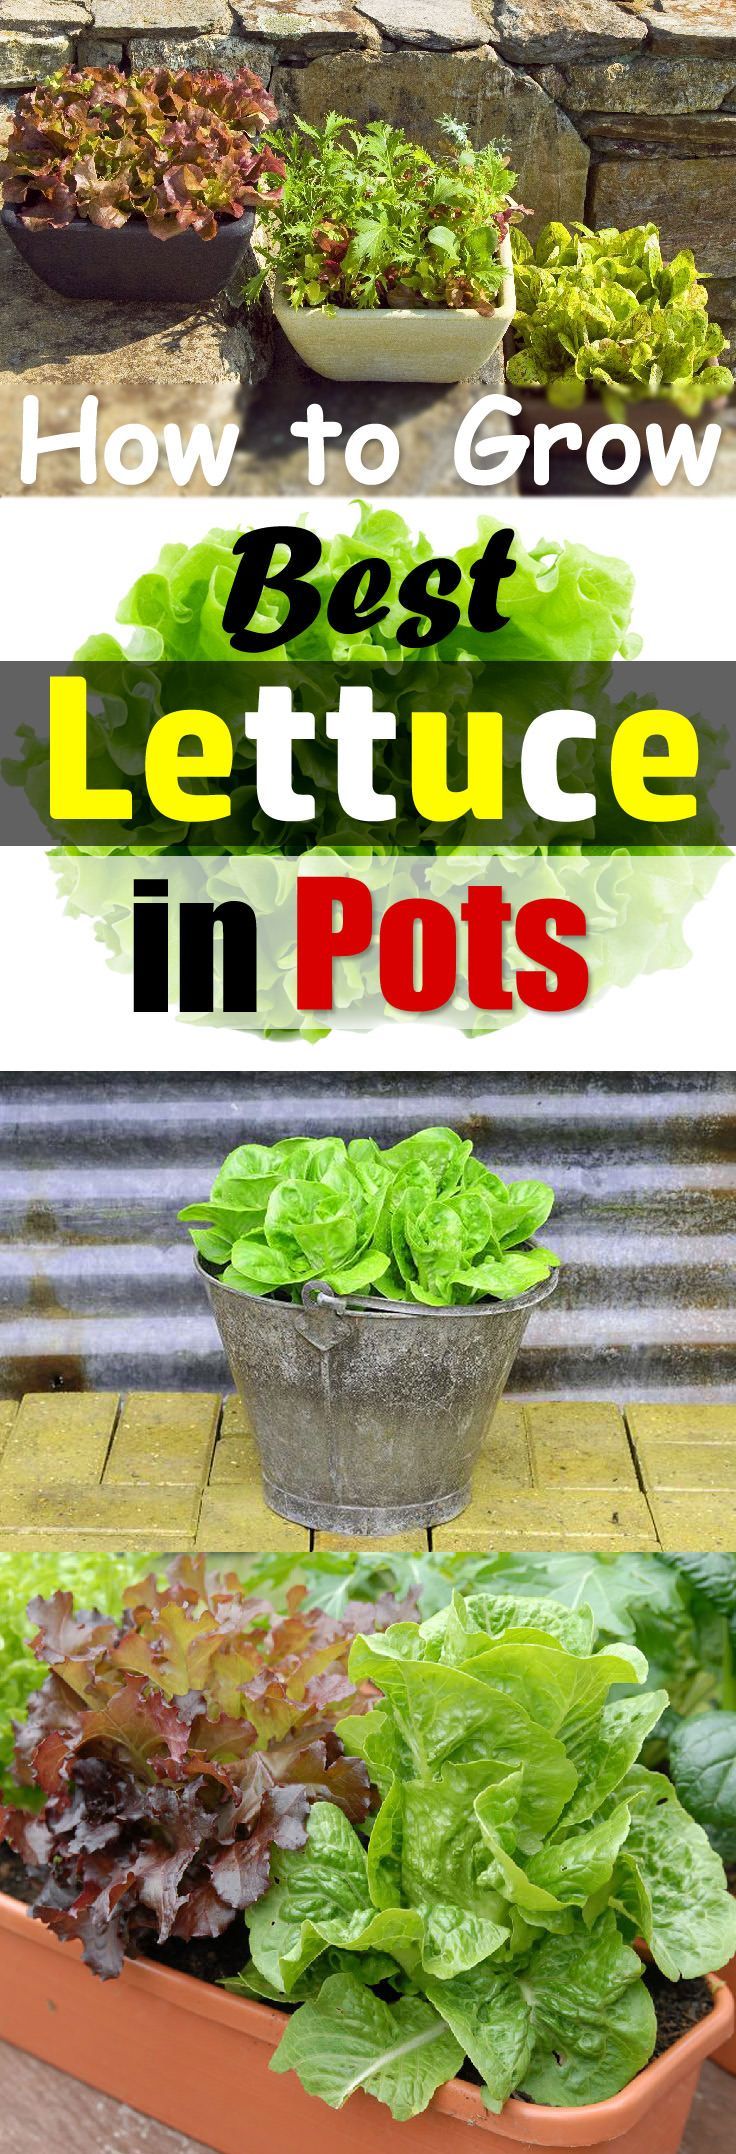 Growing lettuce in containers is fun and easy and you can harvest fresh, crispy, and organic lettuce leaves for your salads in no